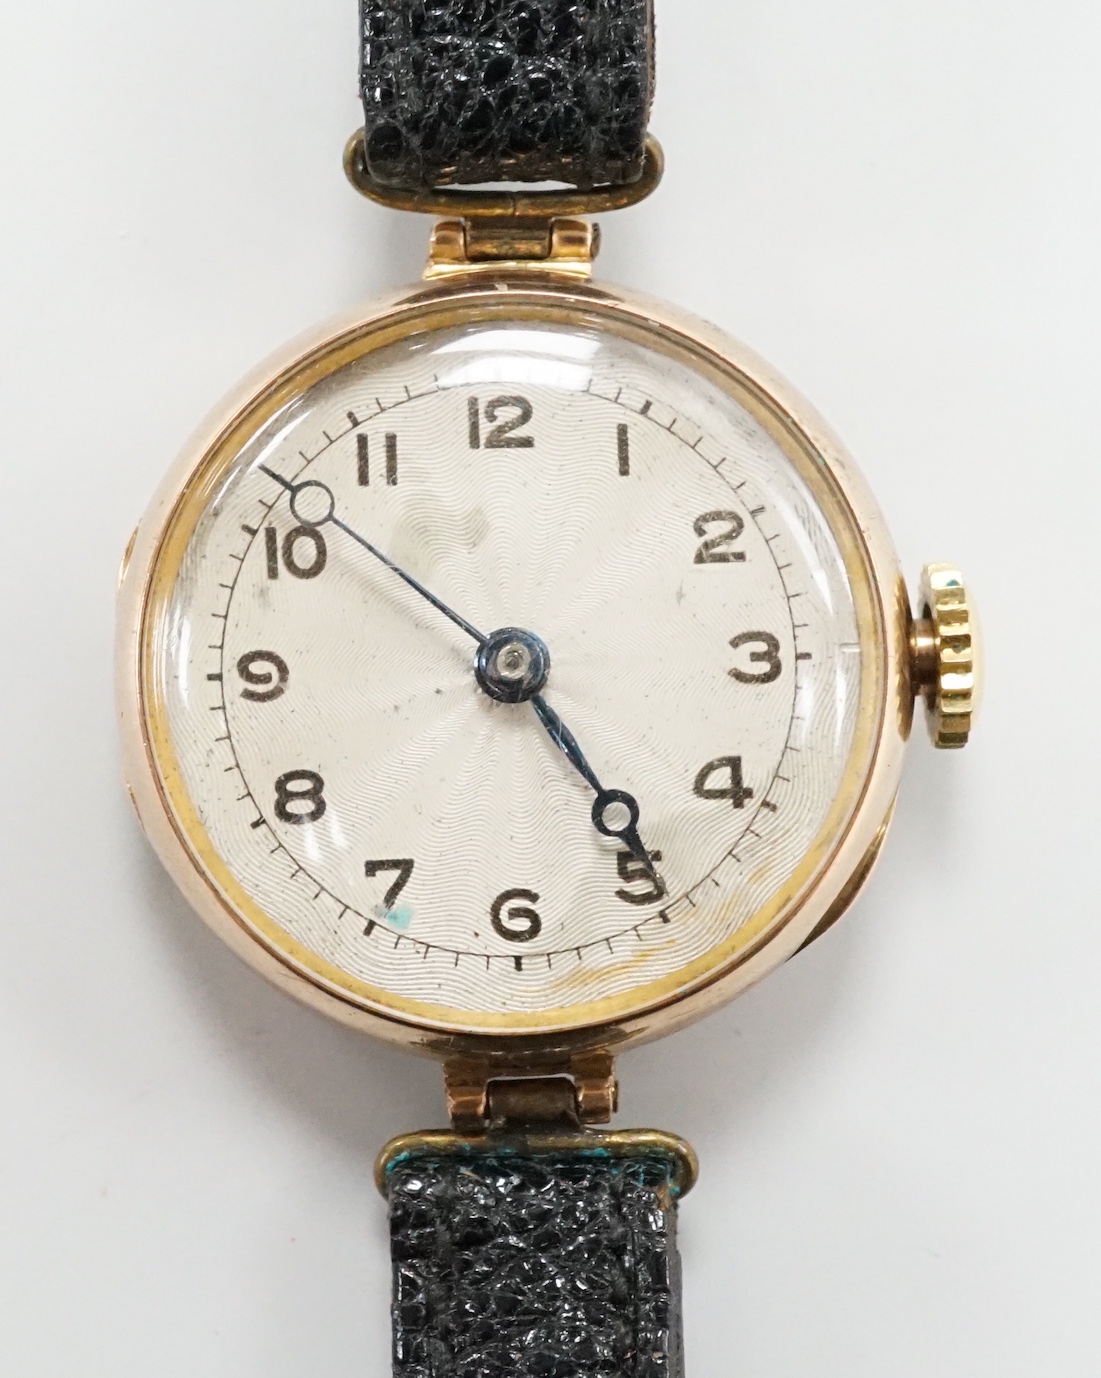 An early 20th century 9ct gold Rolex manual wind wrist watch, with Arabic dial, case diameter 27mm, on associated leather strap.